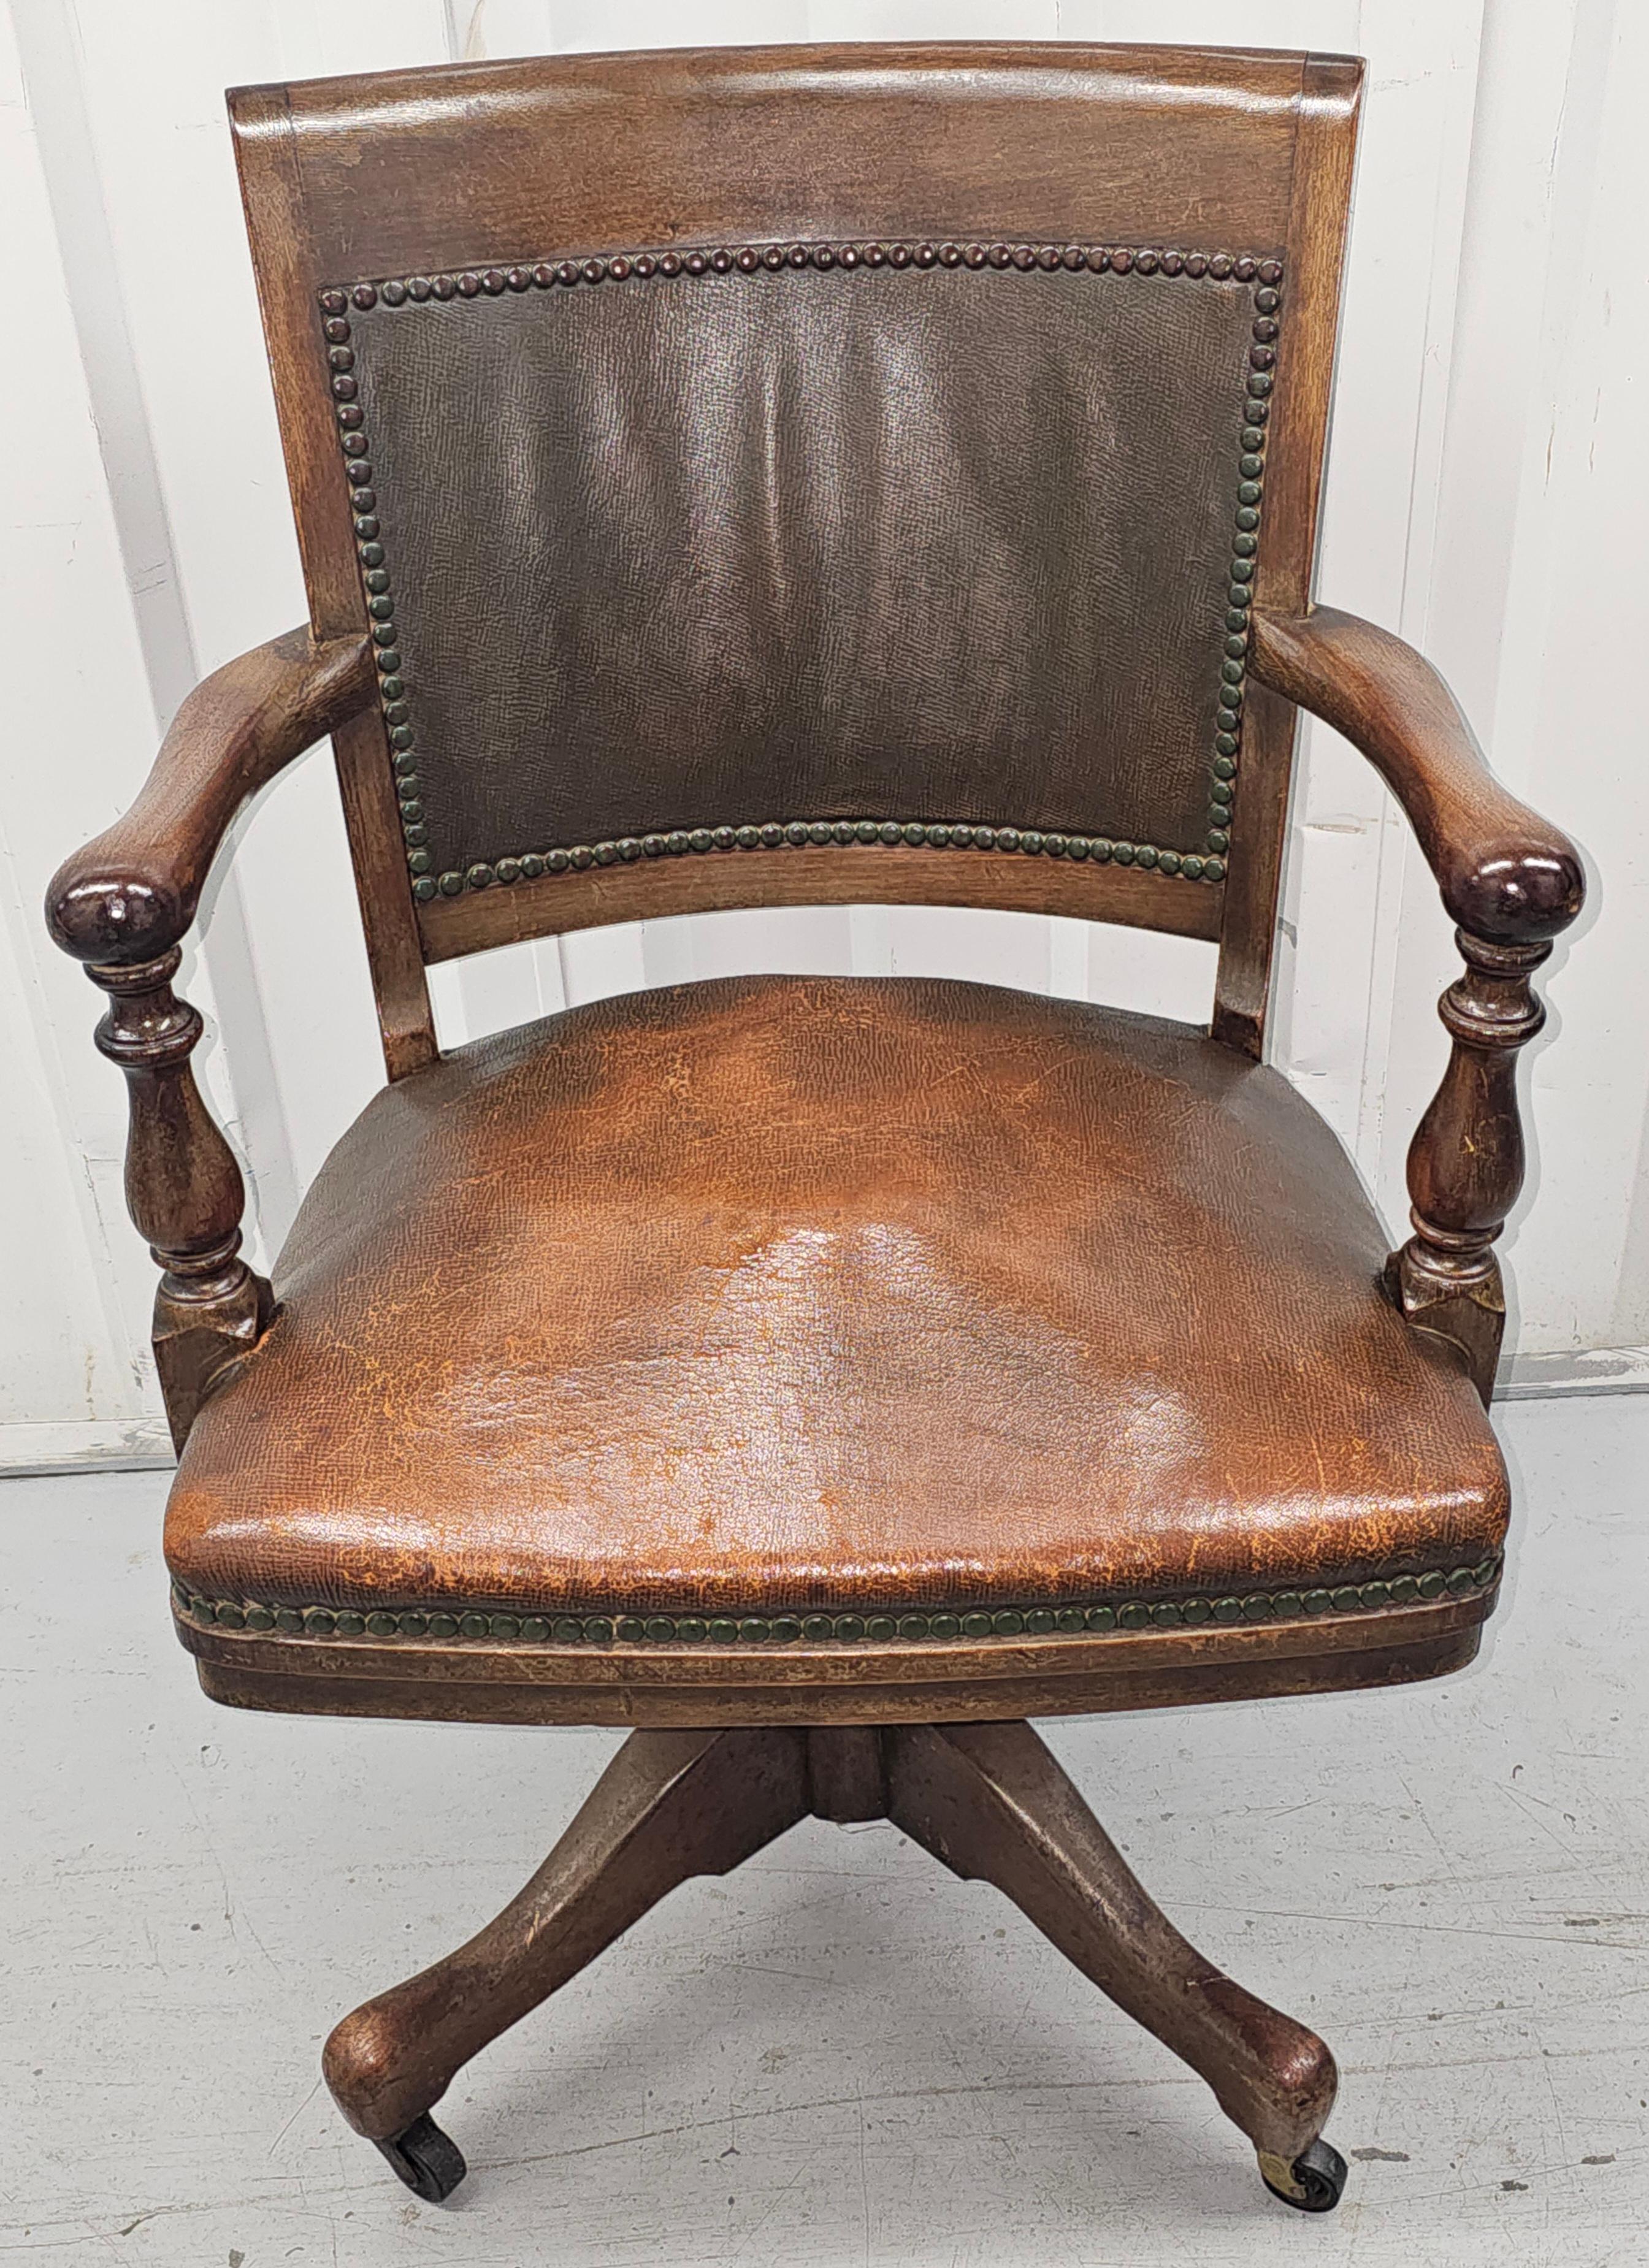 1900s Sikes Furniture Walnut & Leather Upholstered Desk Chair In Good Condition For Sale In Germantown, MD